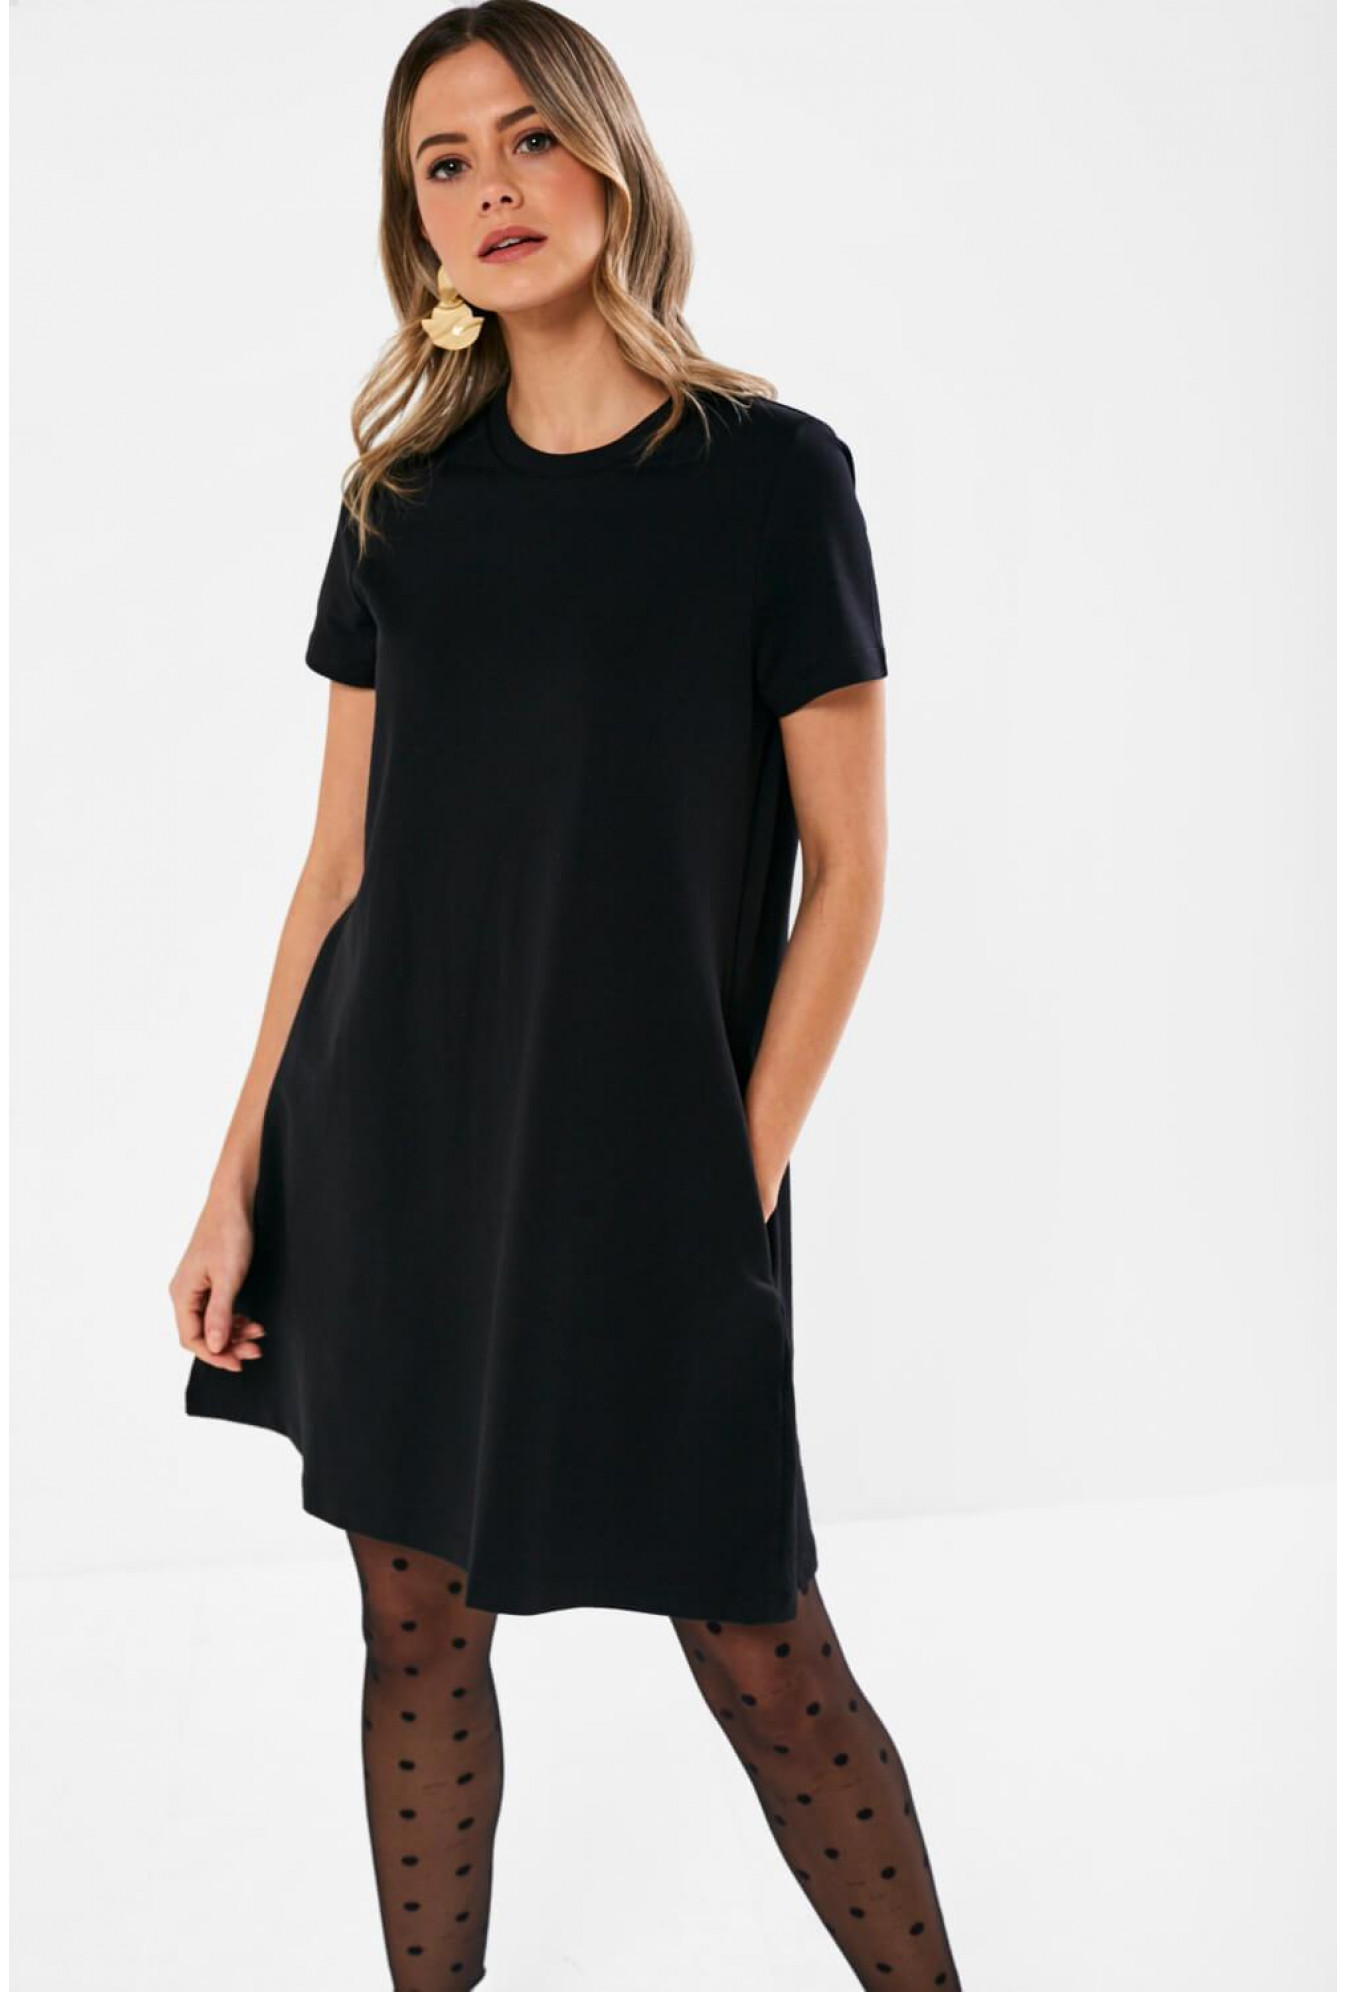 t shirt dress with tights